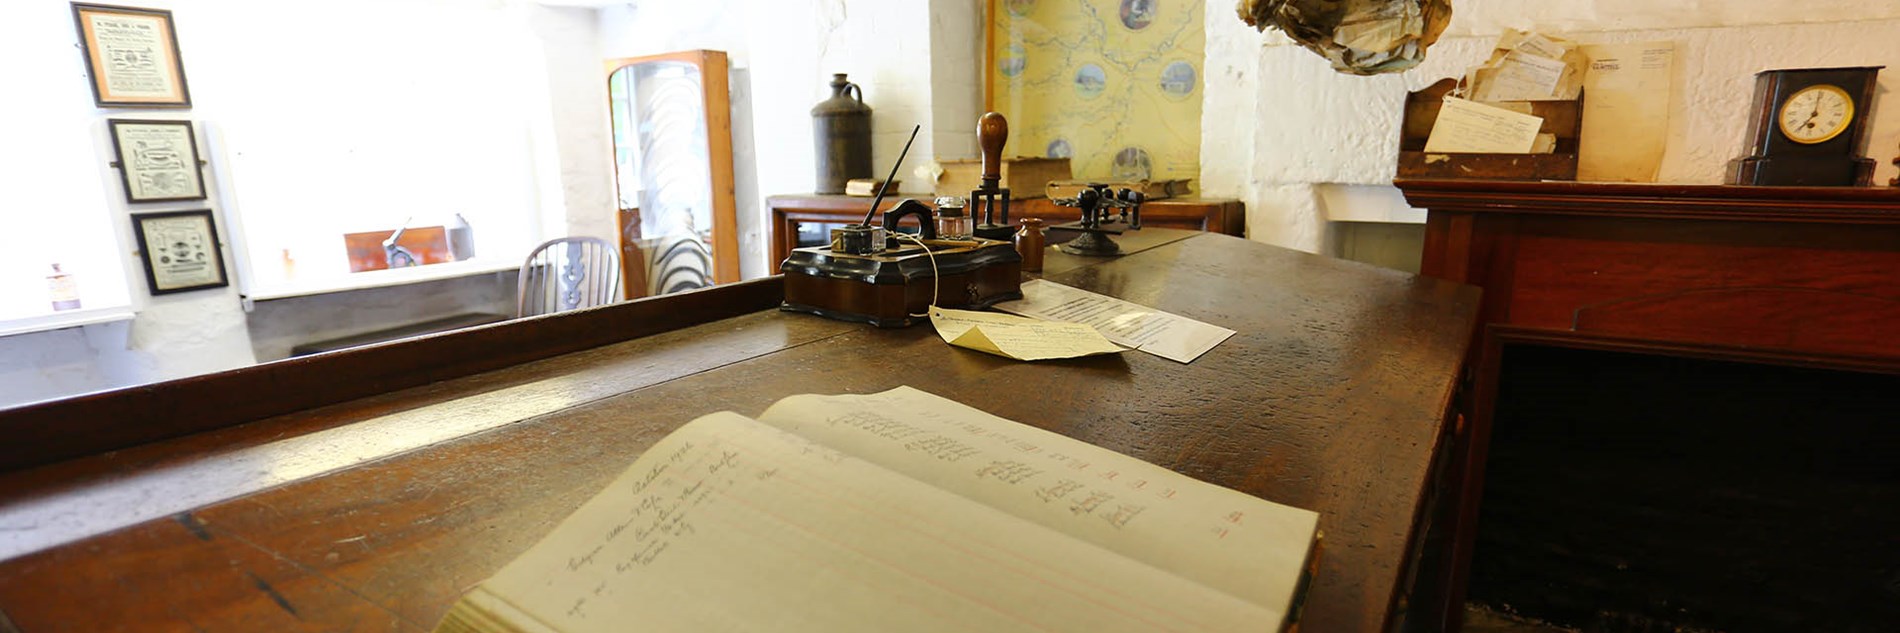 Internal view of Counting House looking across old desk with open ledger and various items of period office equipment.